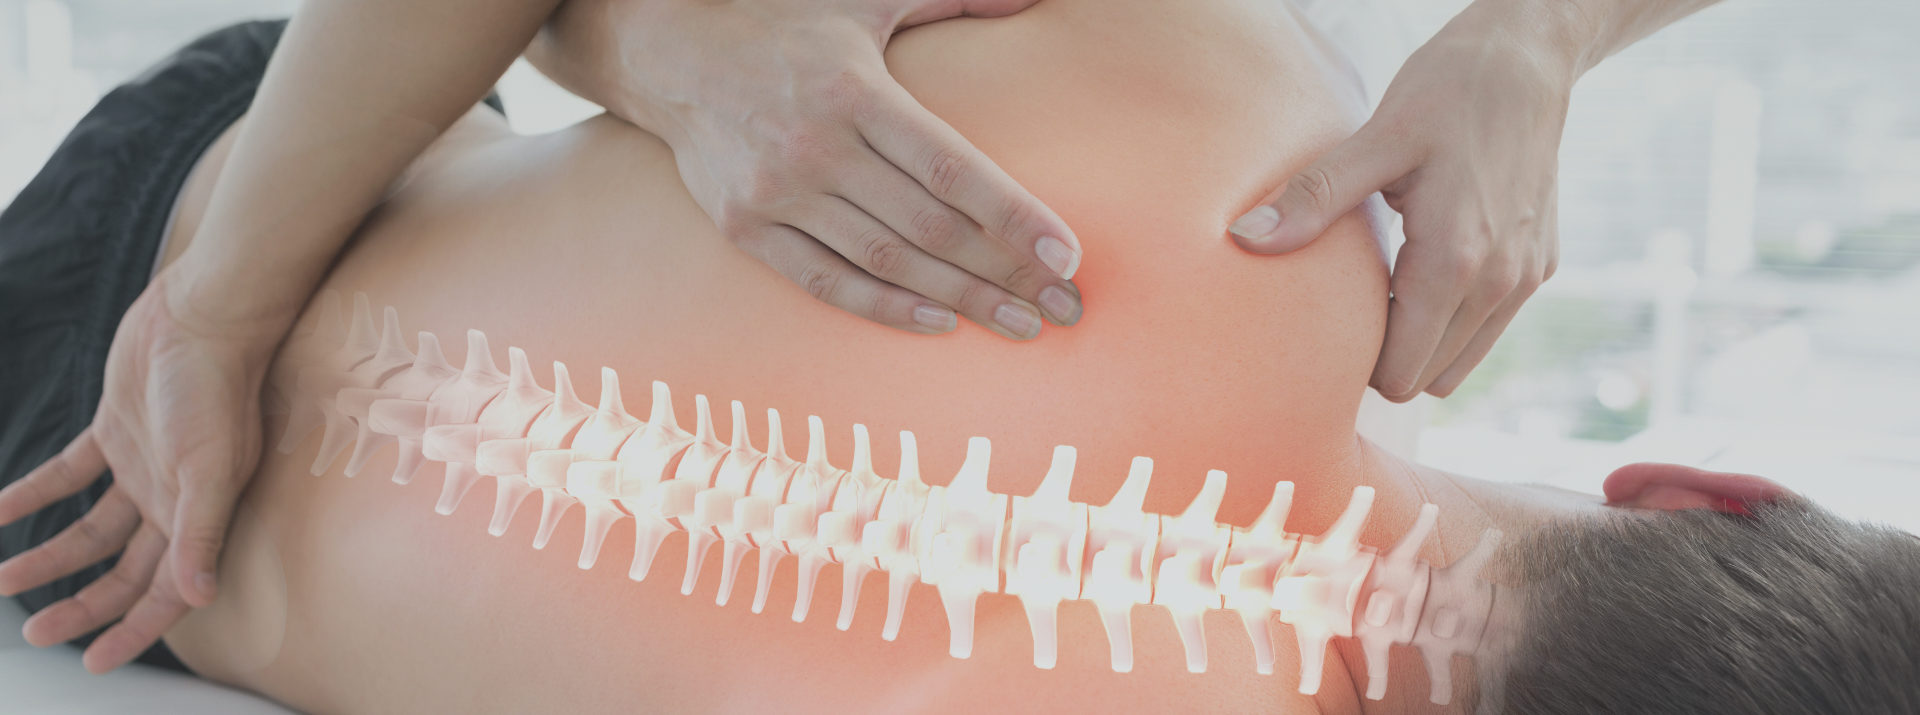 Gentle Chiropractic Care for Auto, Work, and Sports Injuries